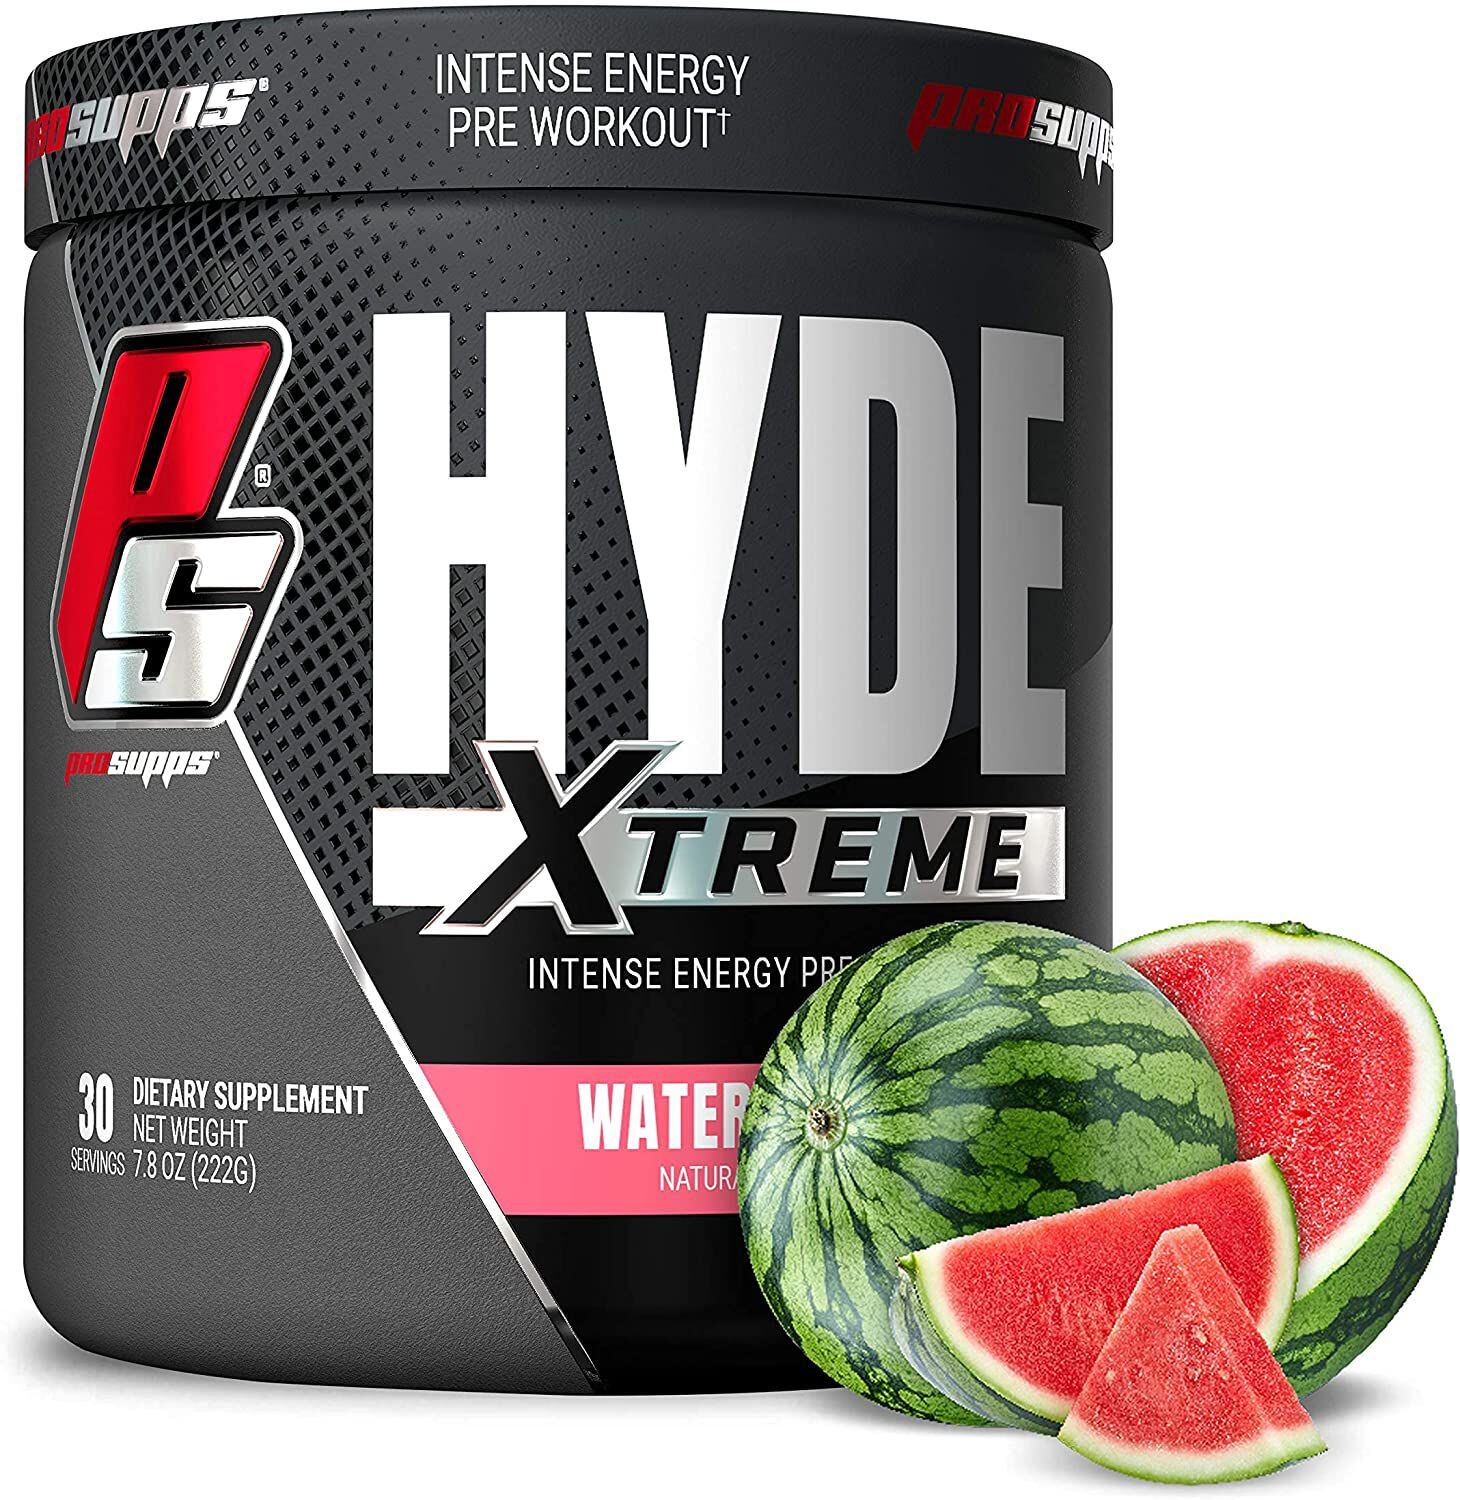 Mr. Hyde Extreme product label